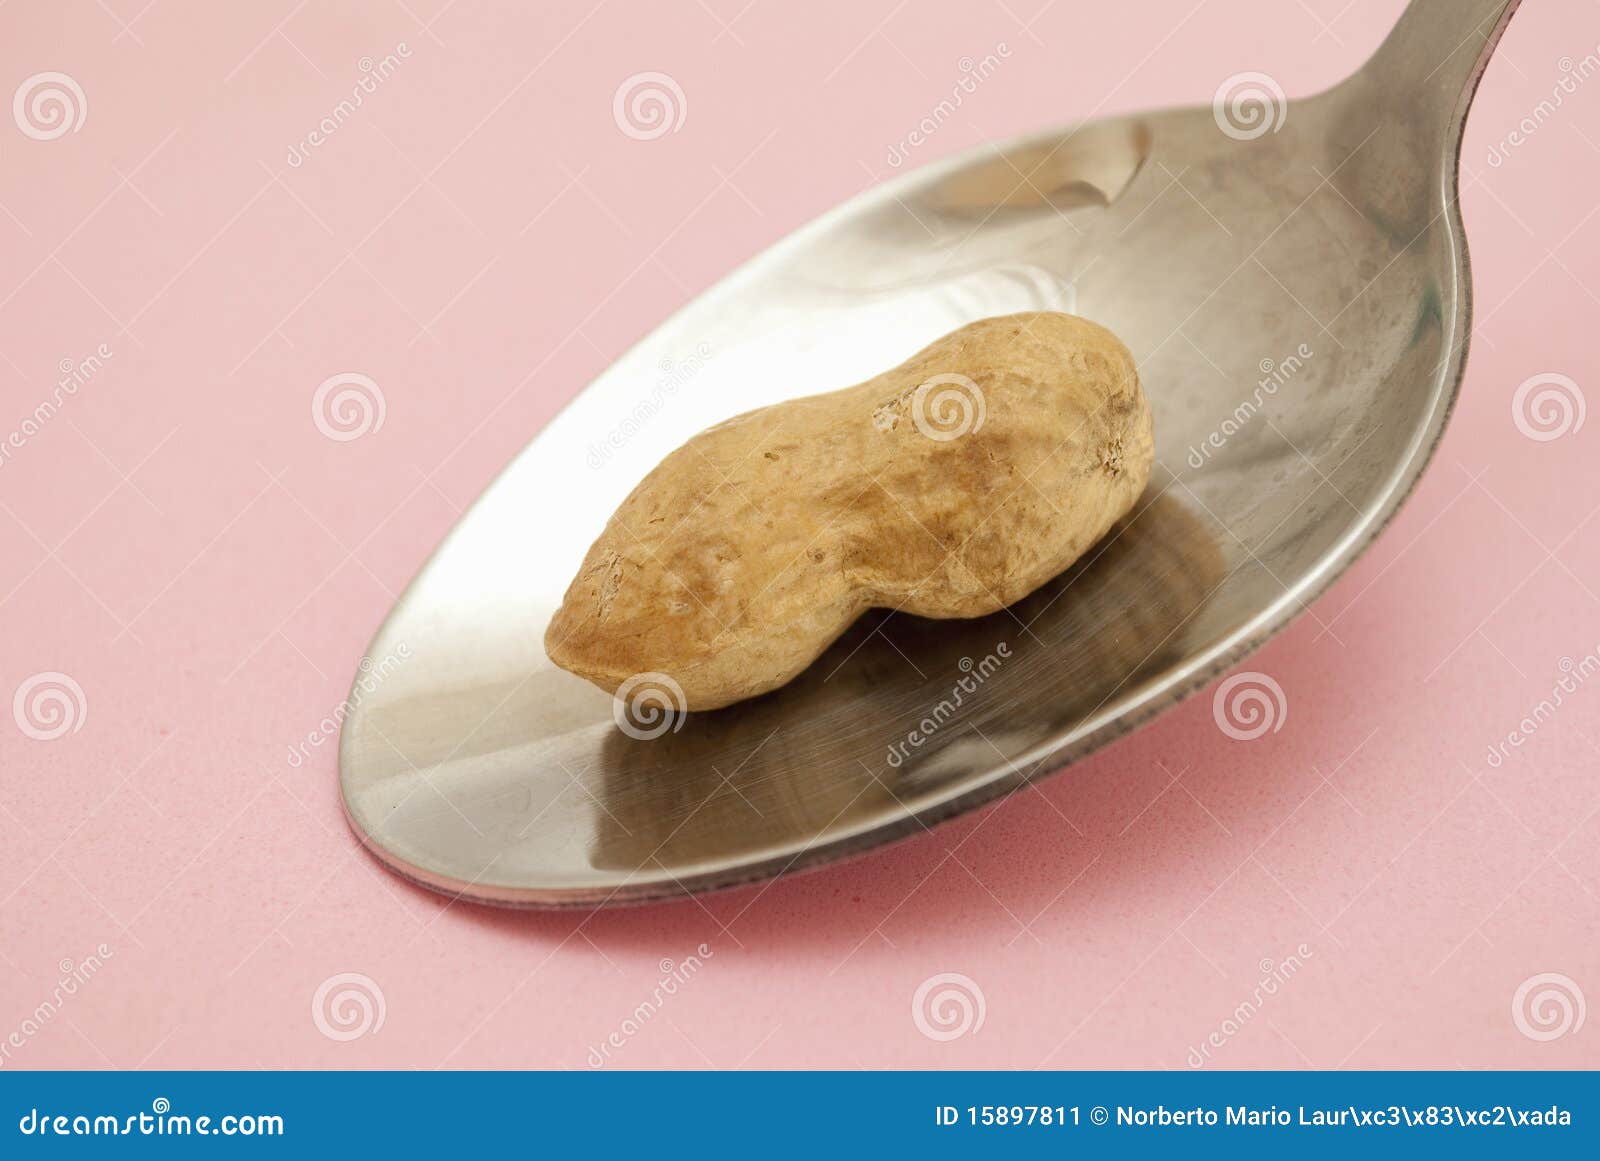 spoon with peanut